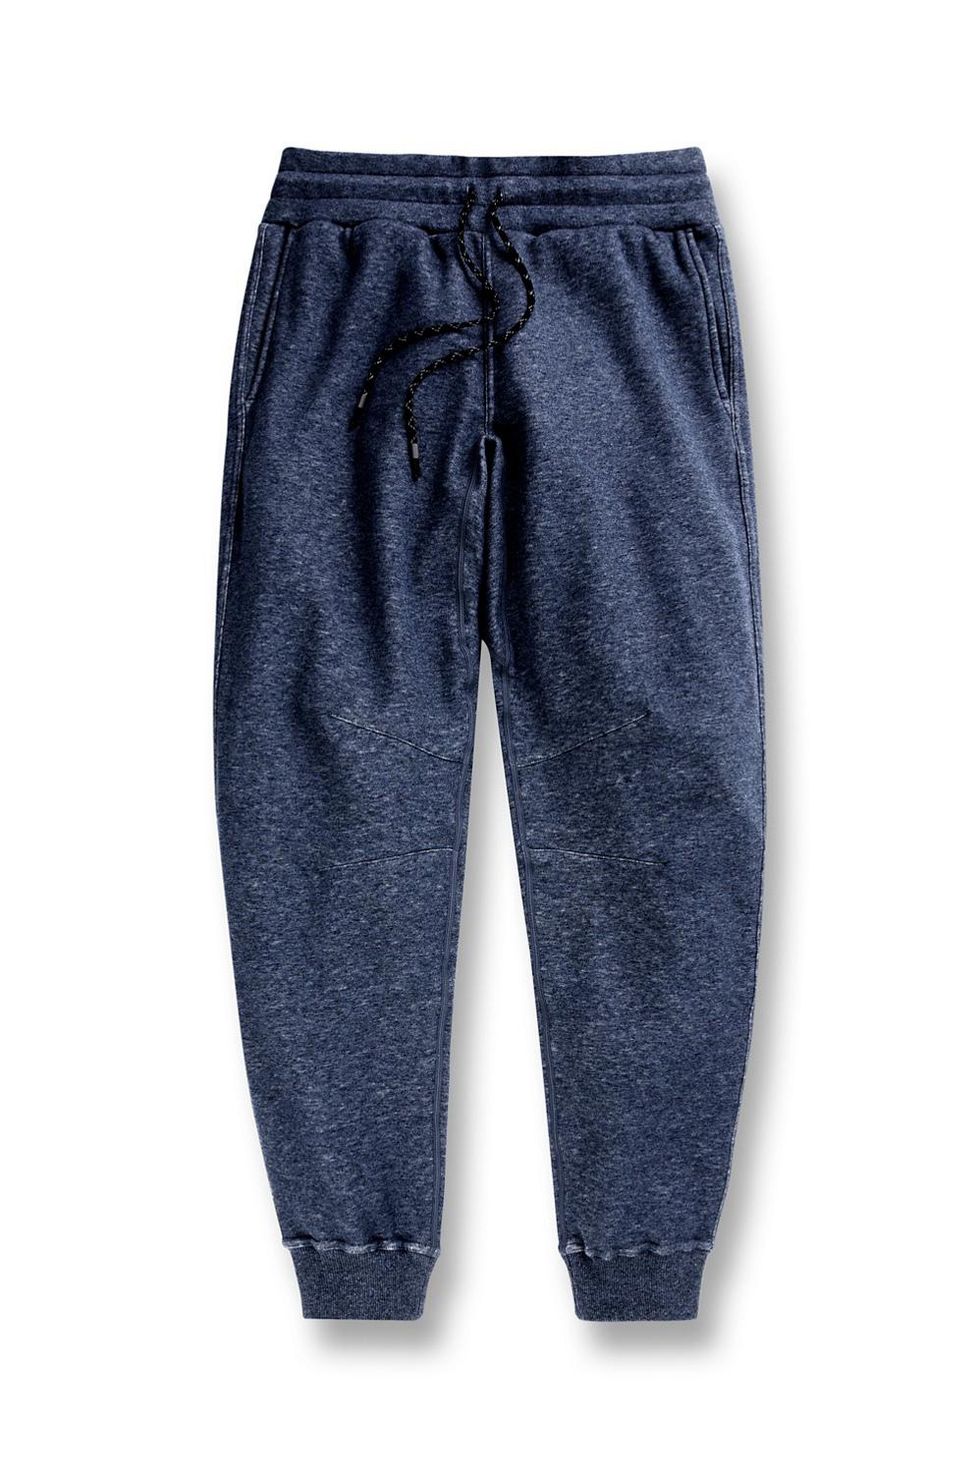 Our Top 5 Picks From Fabletics Men - The Journiest